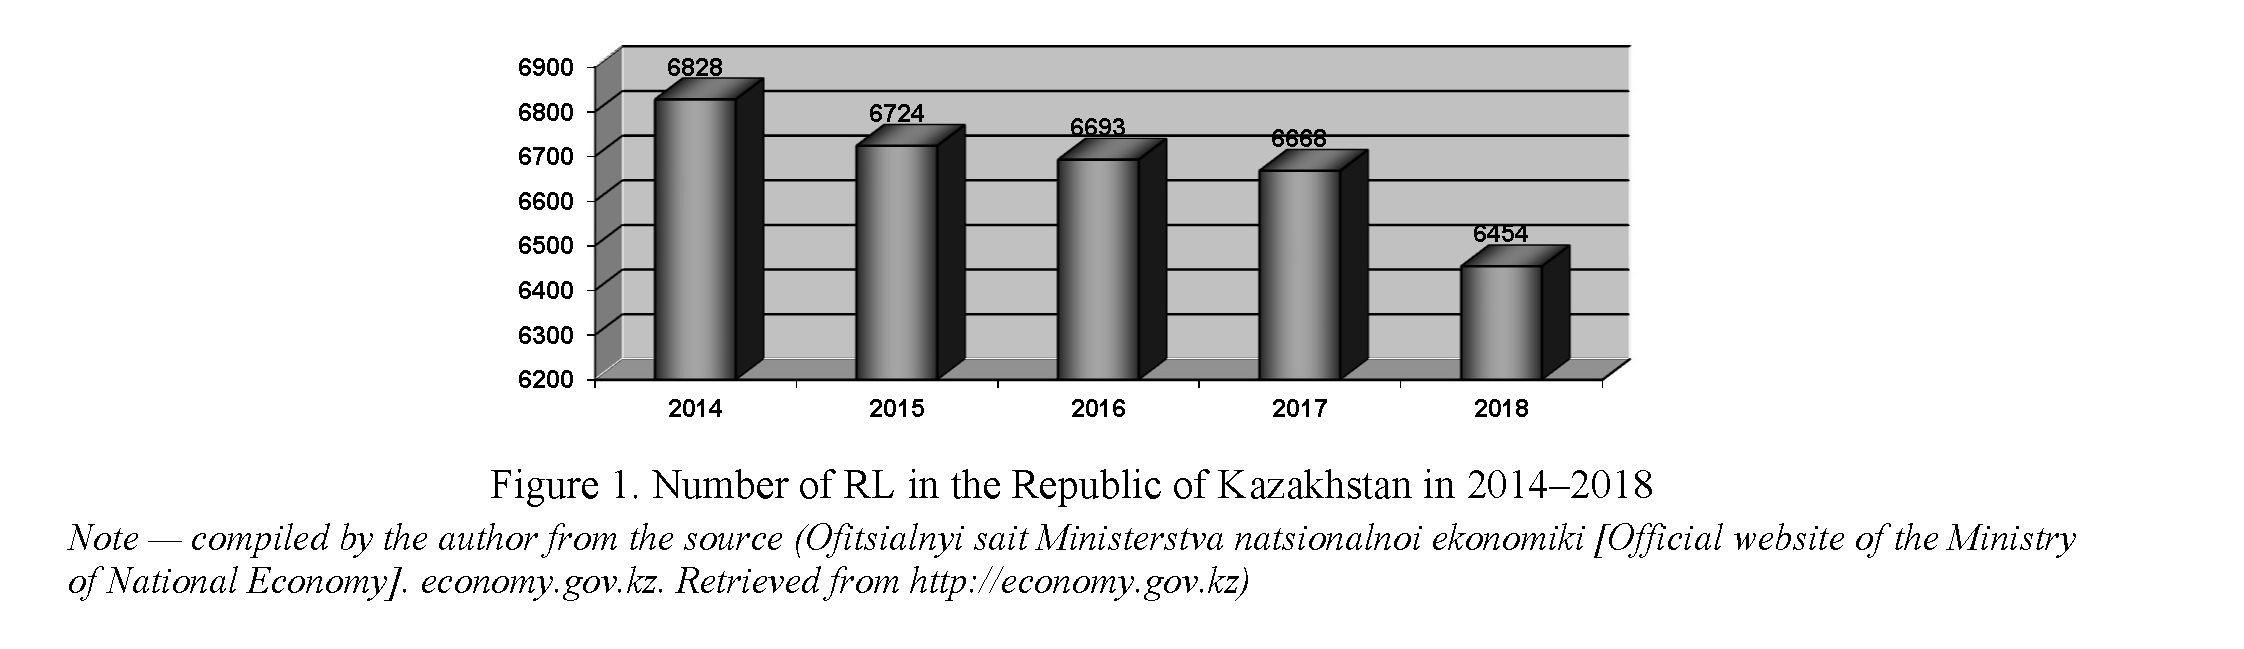 Social infrastructure management in villages of the Republic of Kazakhstan